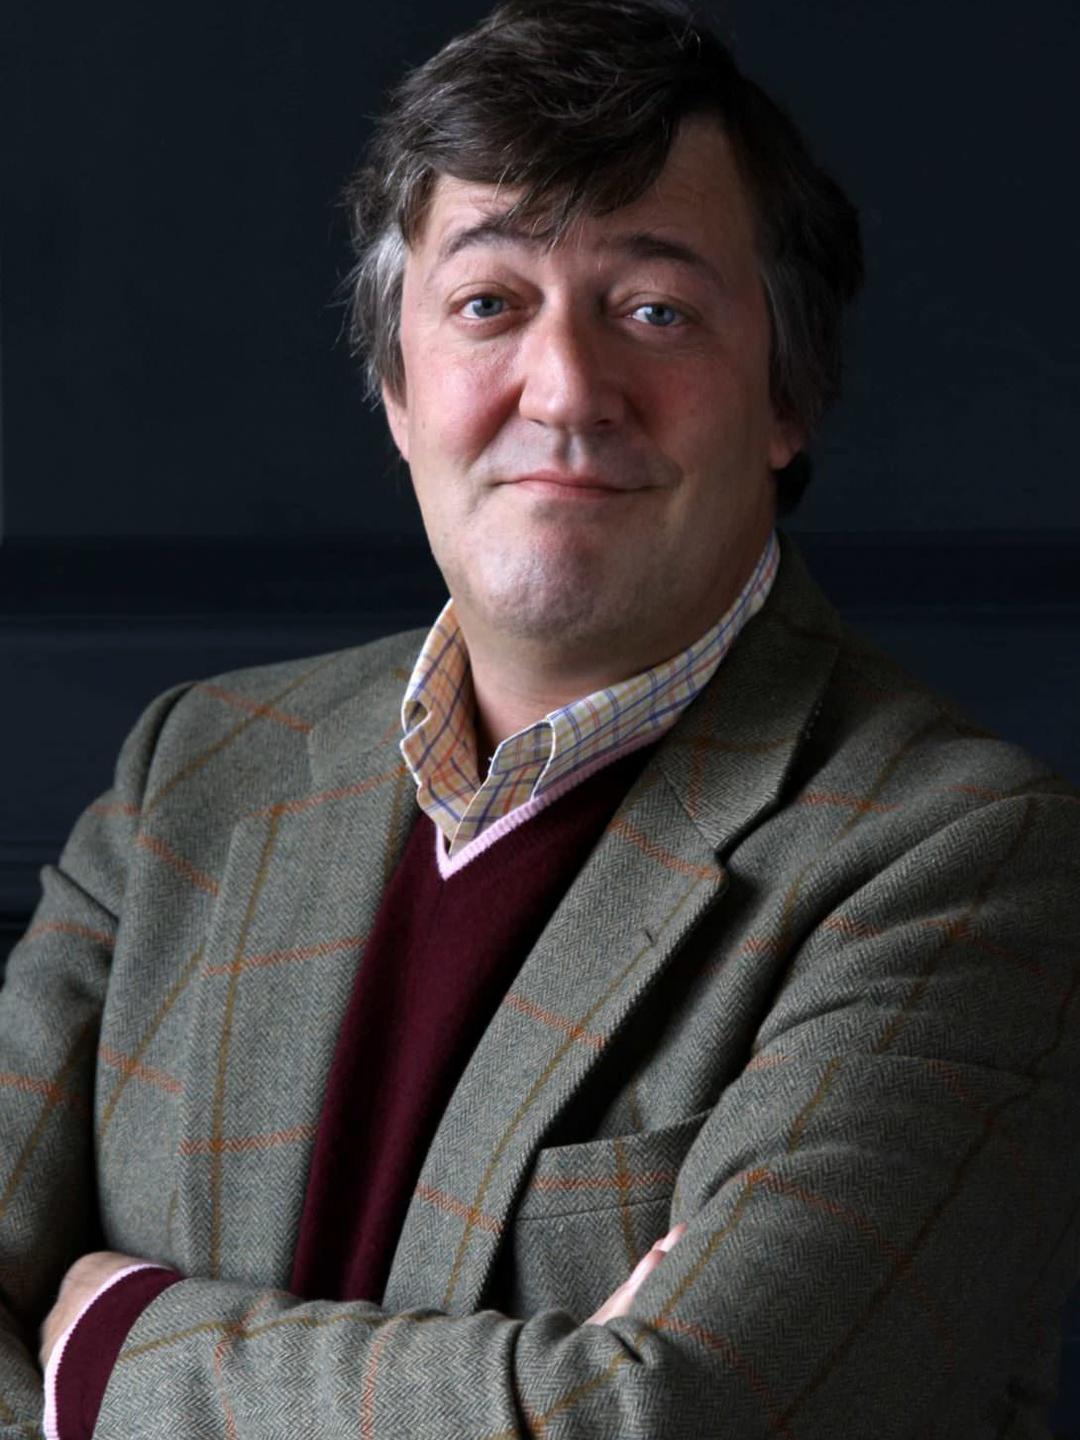 Stephen Fry way to fame